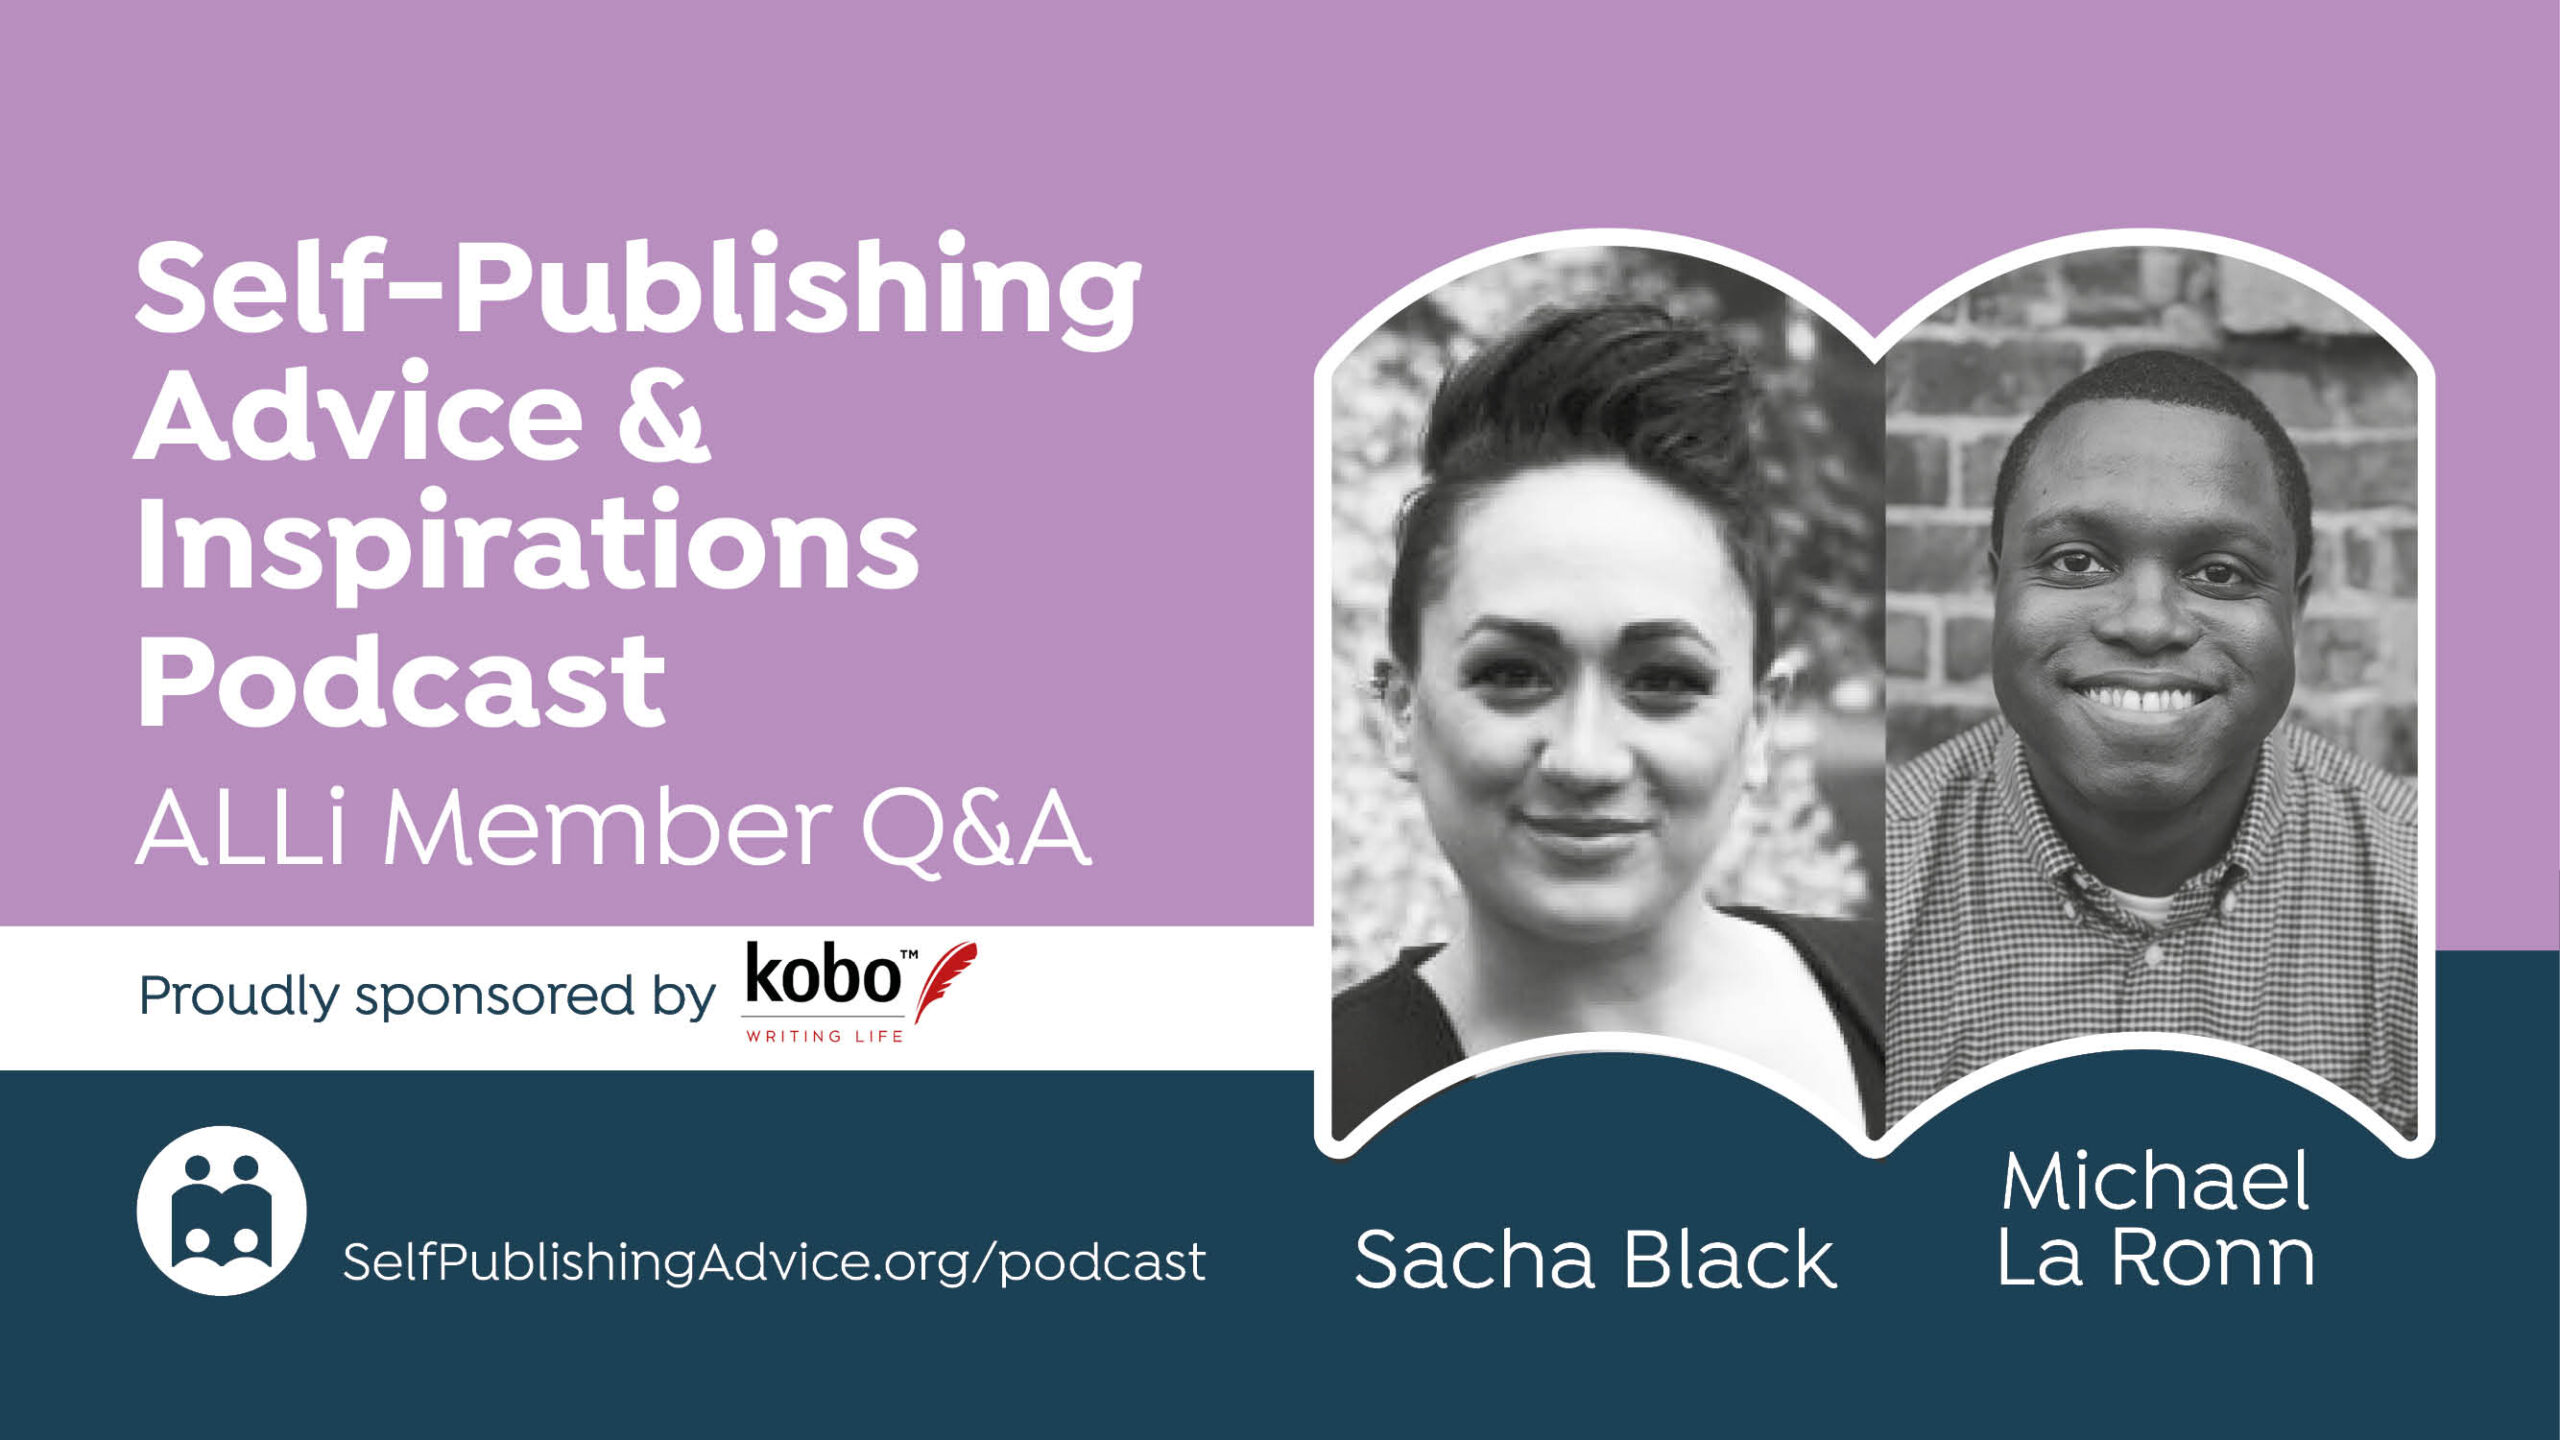 Unauthorized Biographies, Pre-Order Problems, Getting Reviews, And More Questions Answered By Michael La Ronn And Sacha Black In Our Member Q&A Podcast